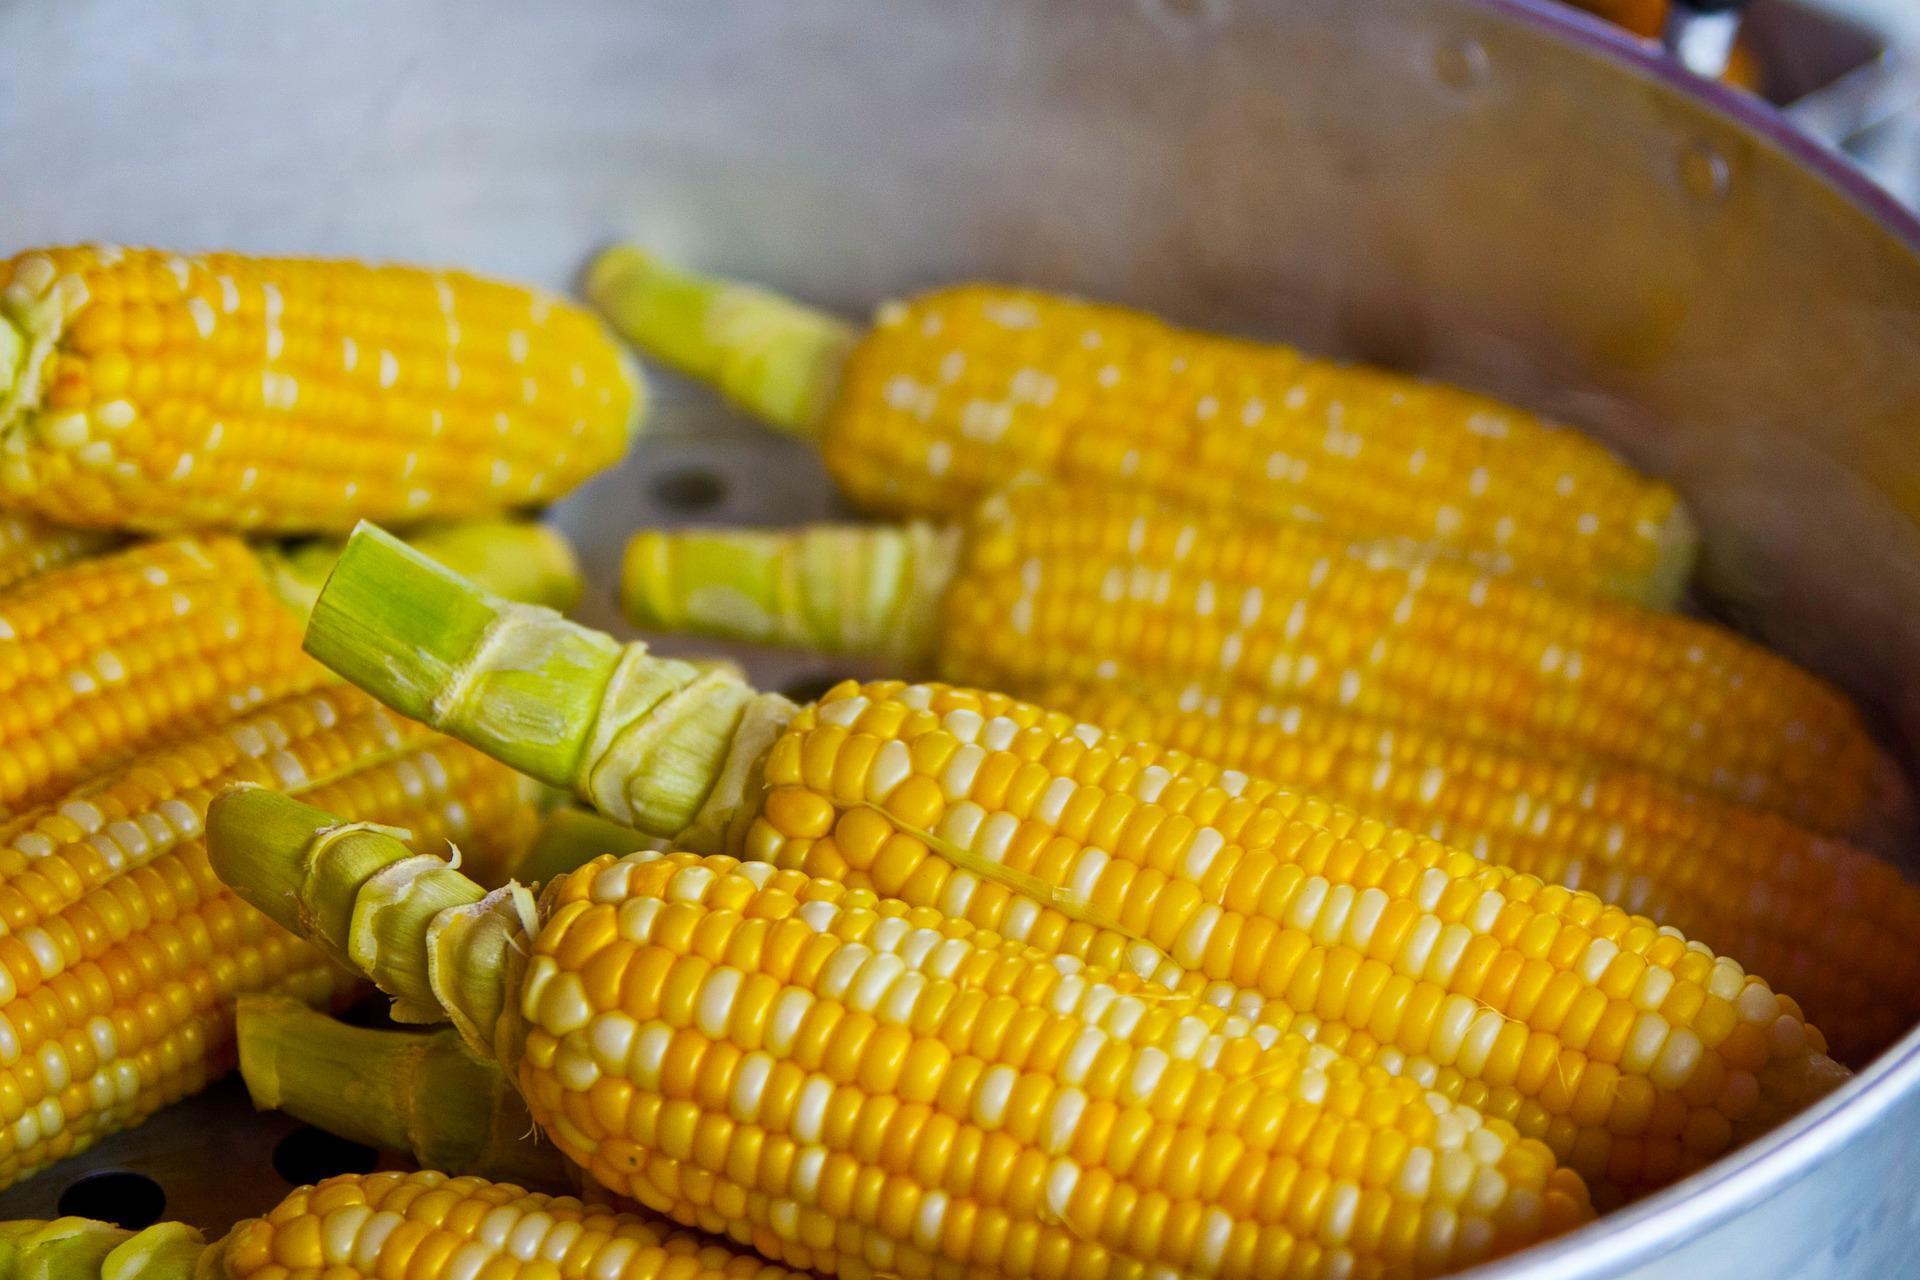 How to cook corn deliciously: no need to boil